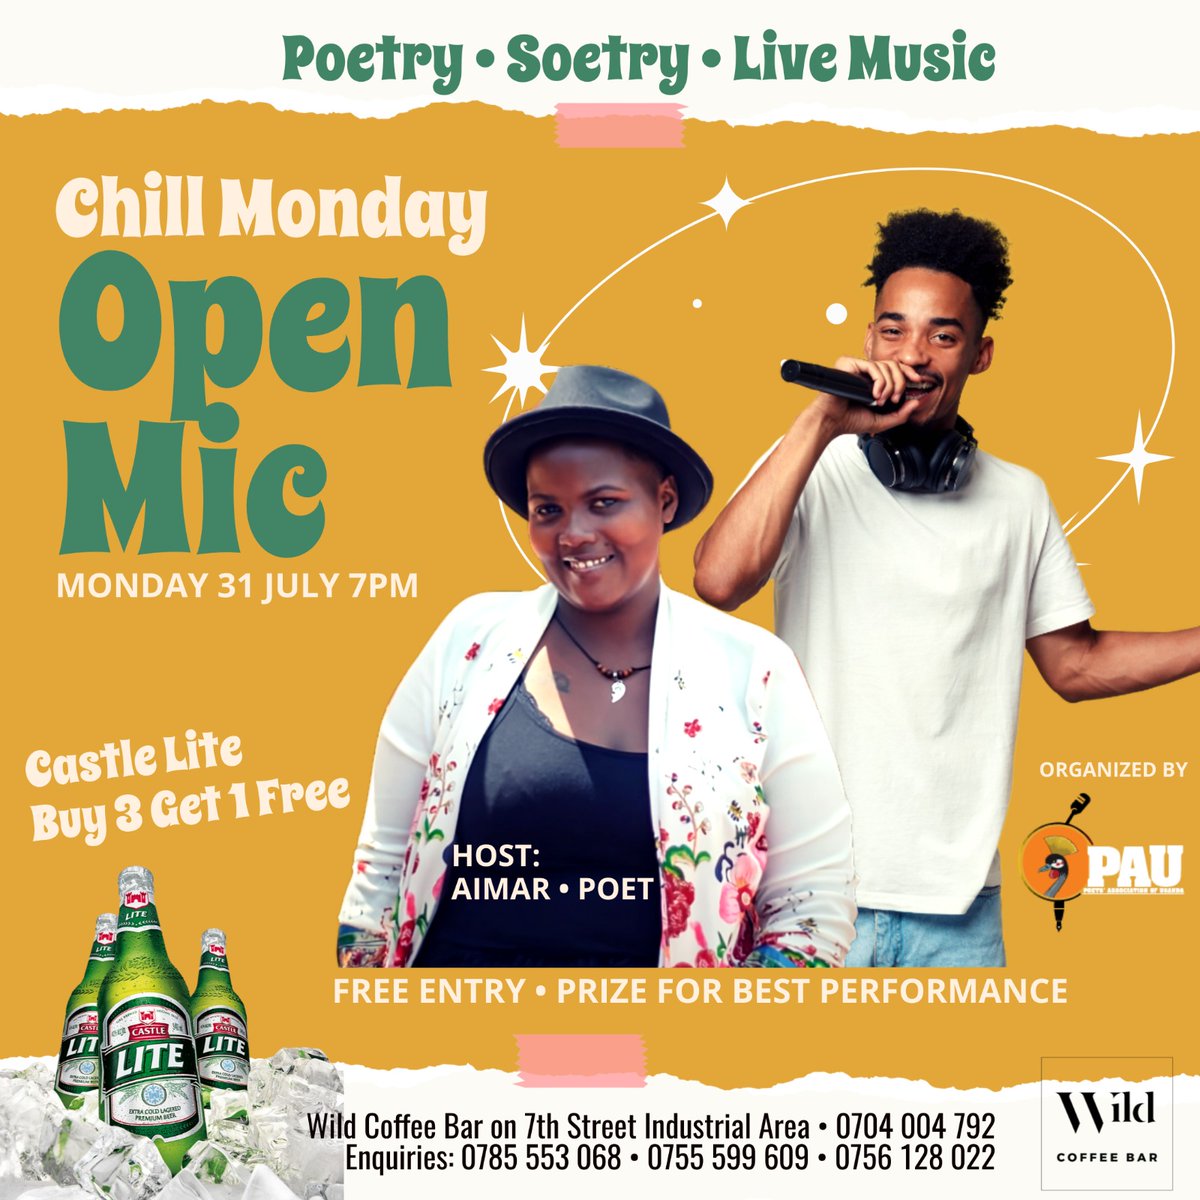 The usual Monday evening plot.

We are on again this Monday. Use the weekend to rest bambi.

📍 @wildcoffeebar1
⌚7pm 
Free Entrance for all.

For any inquiries, reach me via wa.me/256785553068

#ChillMonday #OpenMic #PoetryUgEvents